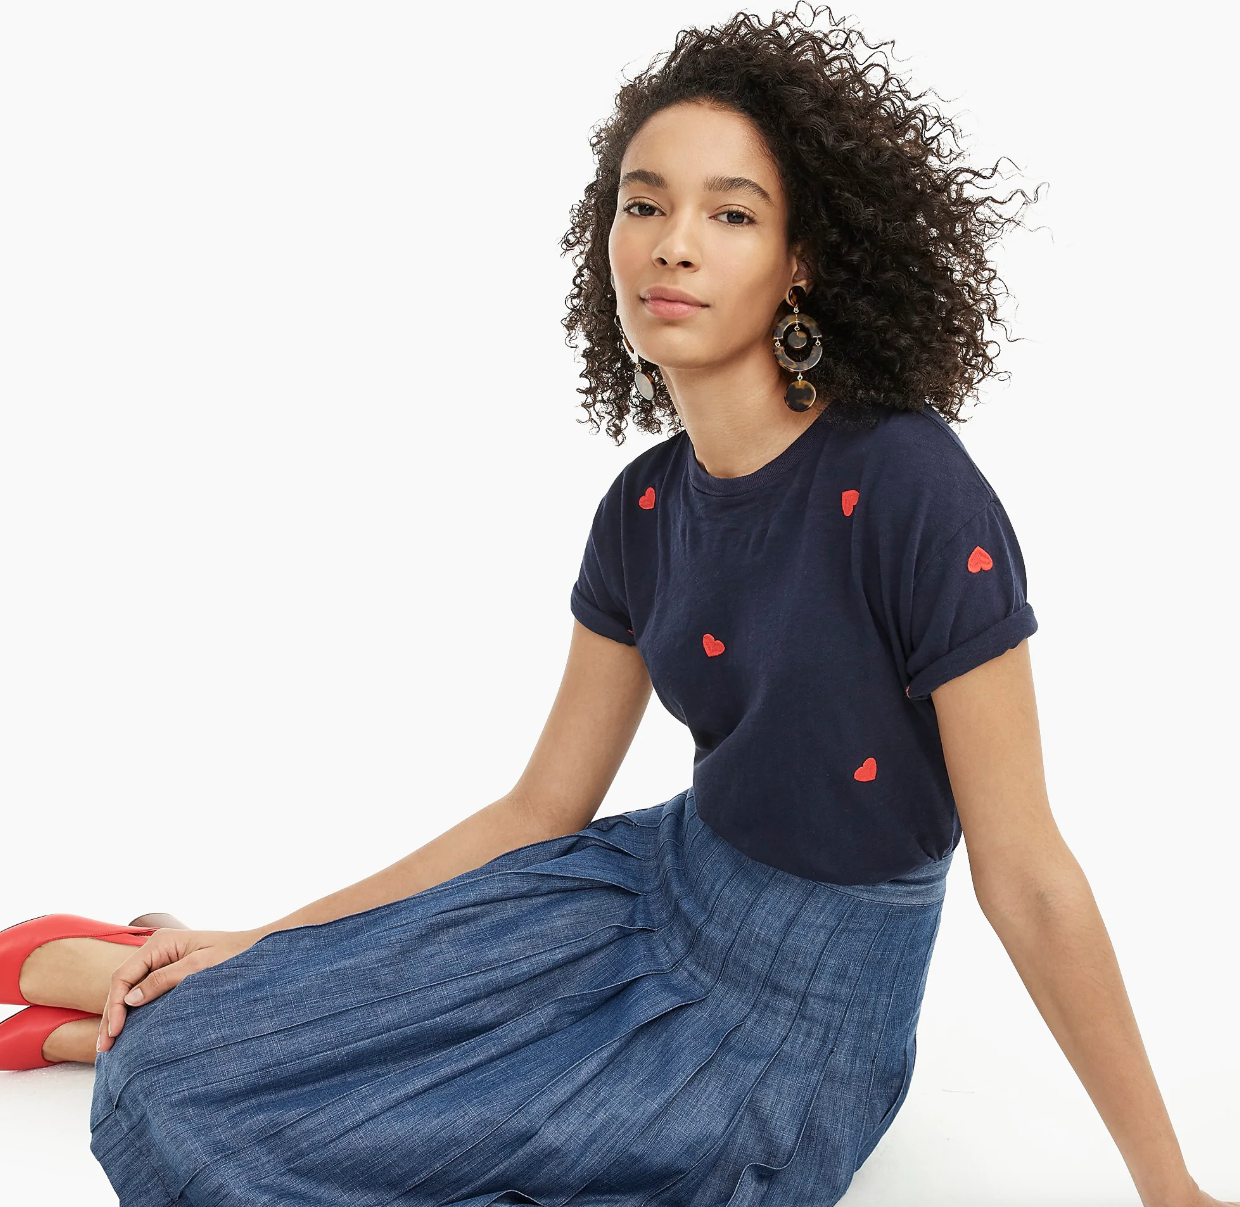 Camilla Atkins, CATKINS DESIGN for J. Crew Spring 2019, embroidered hearts tee shirt- women's apparel.png